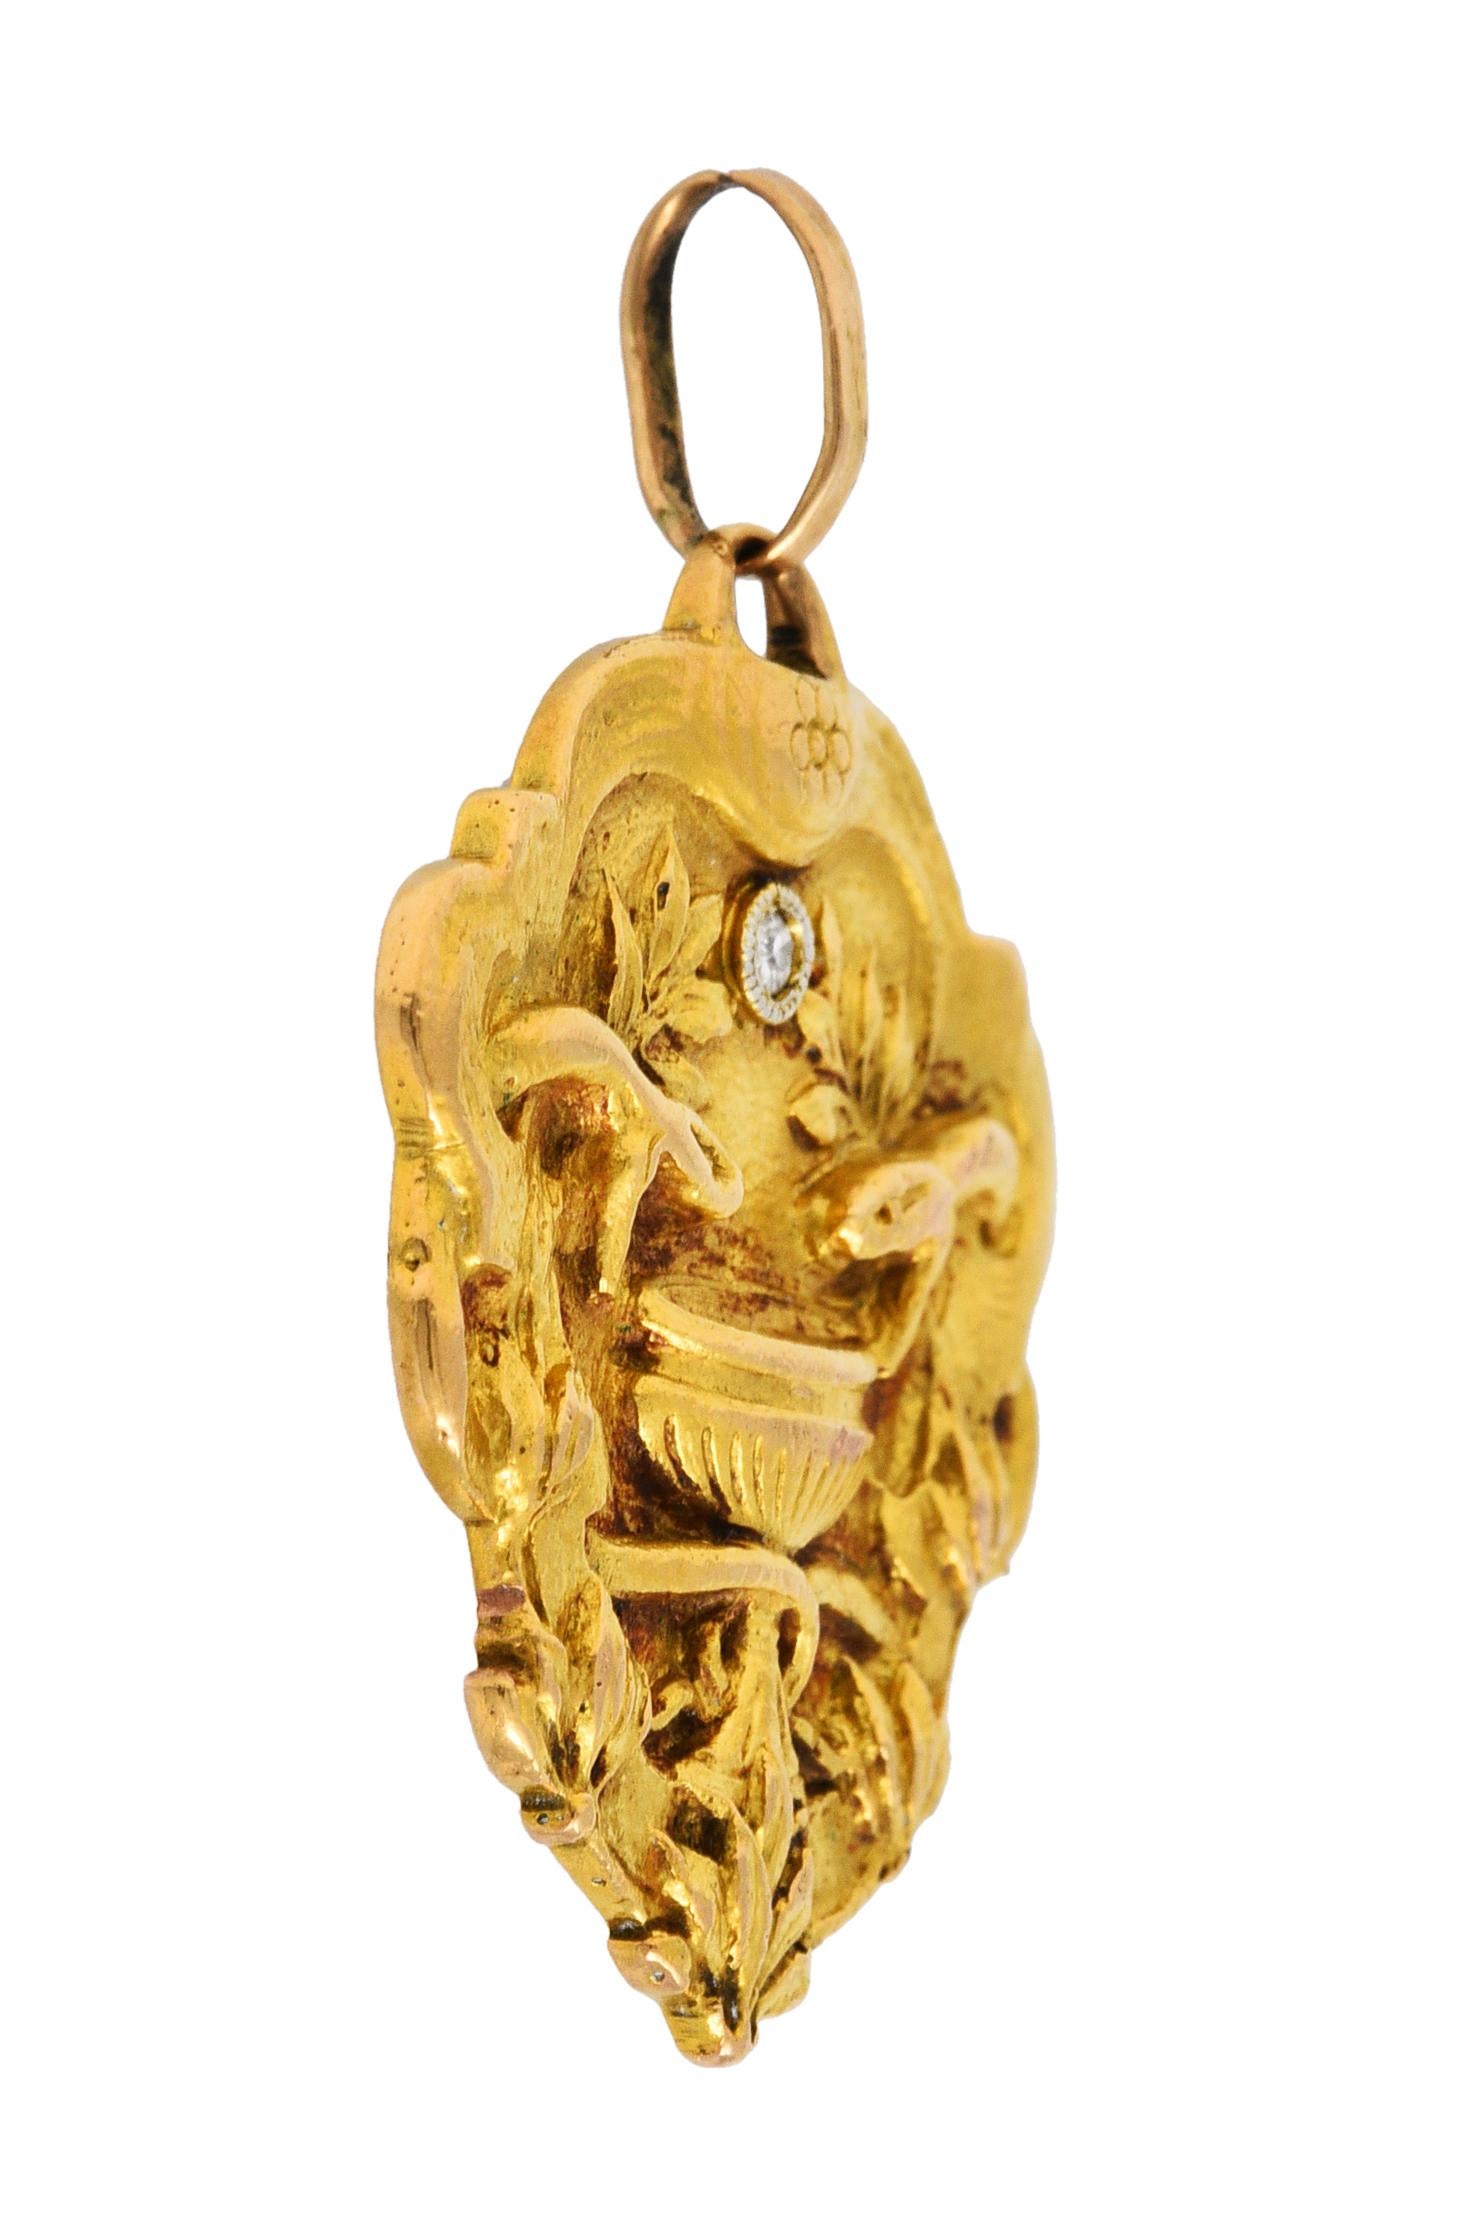 Pendant charm is designed as two intertwined asp snakes hovering over a goblet

Alluding to Cleopatra's romanticized death

Surrounded by stylized foliate and accented by 0.03 carat single cut diamond

Back is emblazoned with a dated